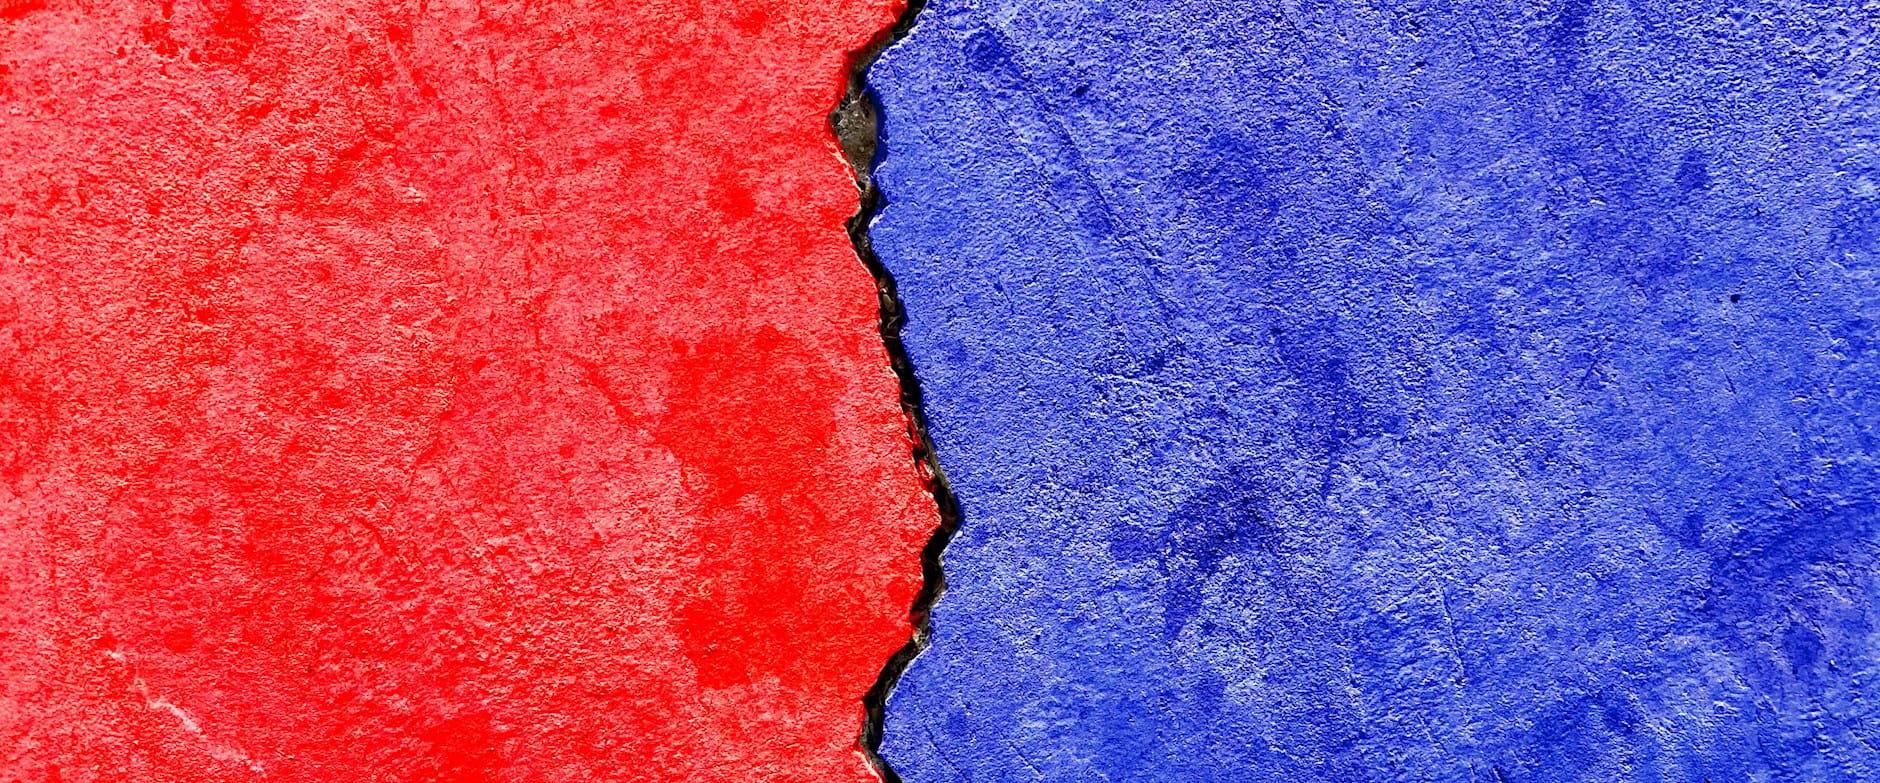 A fracture dividing red and blue surfaces